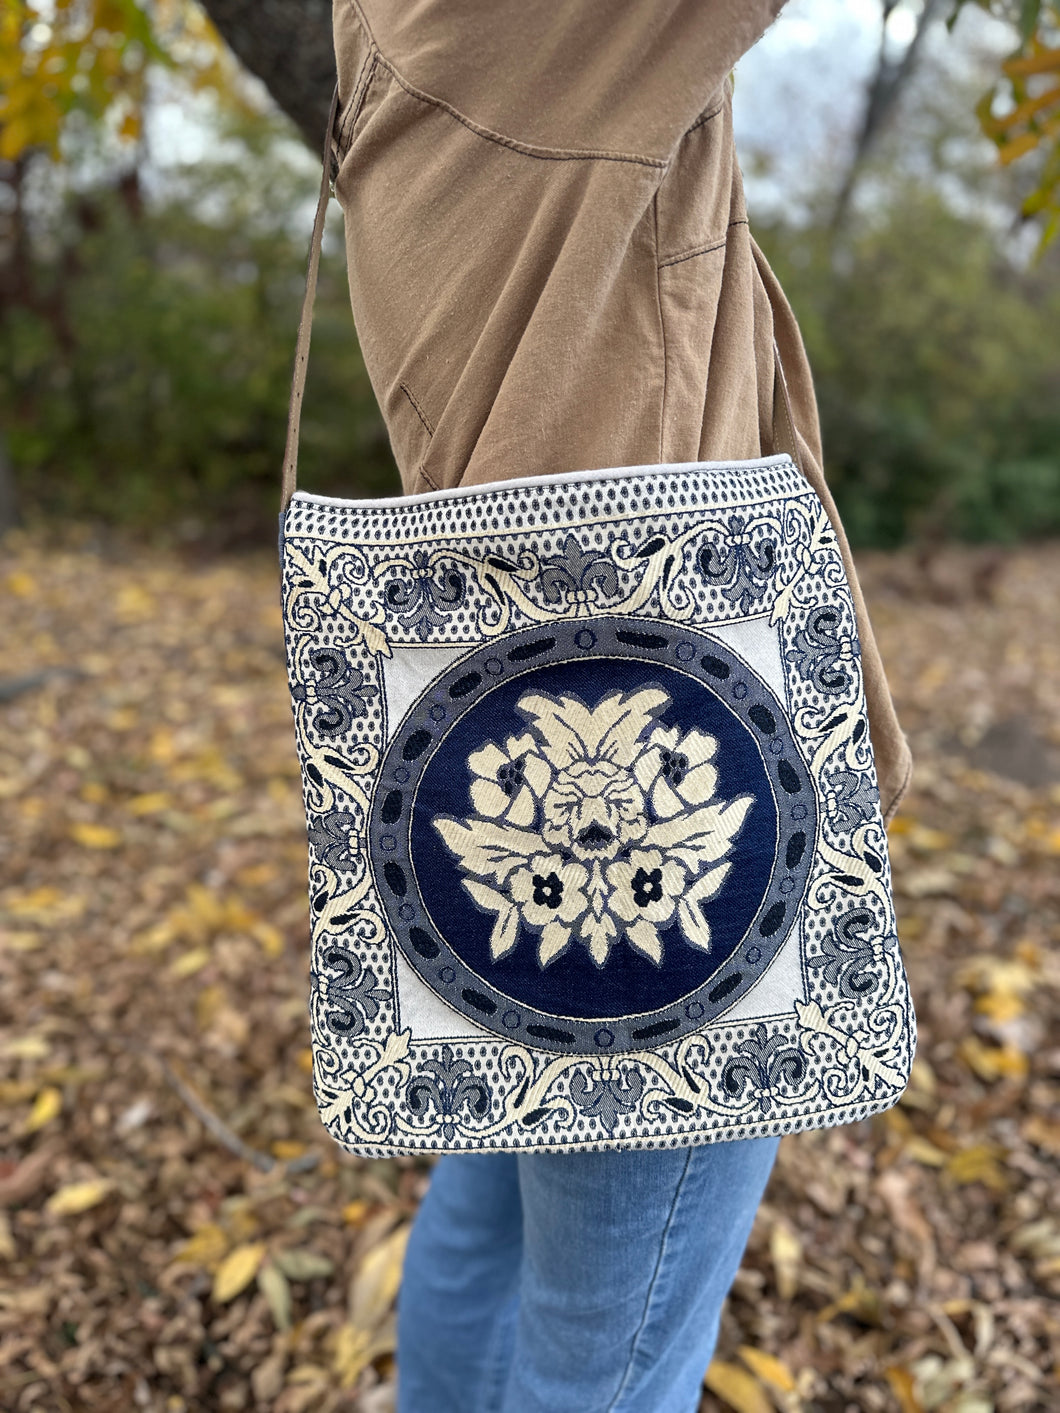 Upcycled Embroidered Purse by Birdy